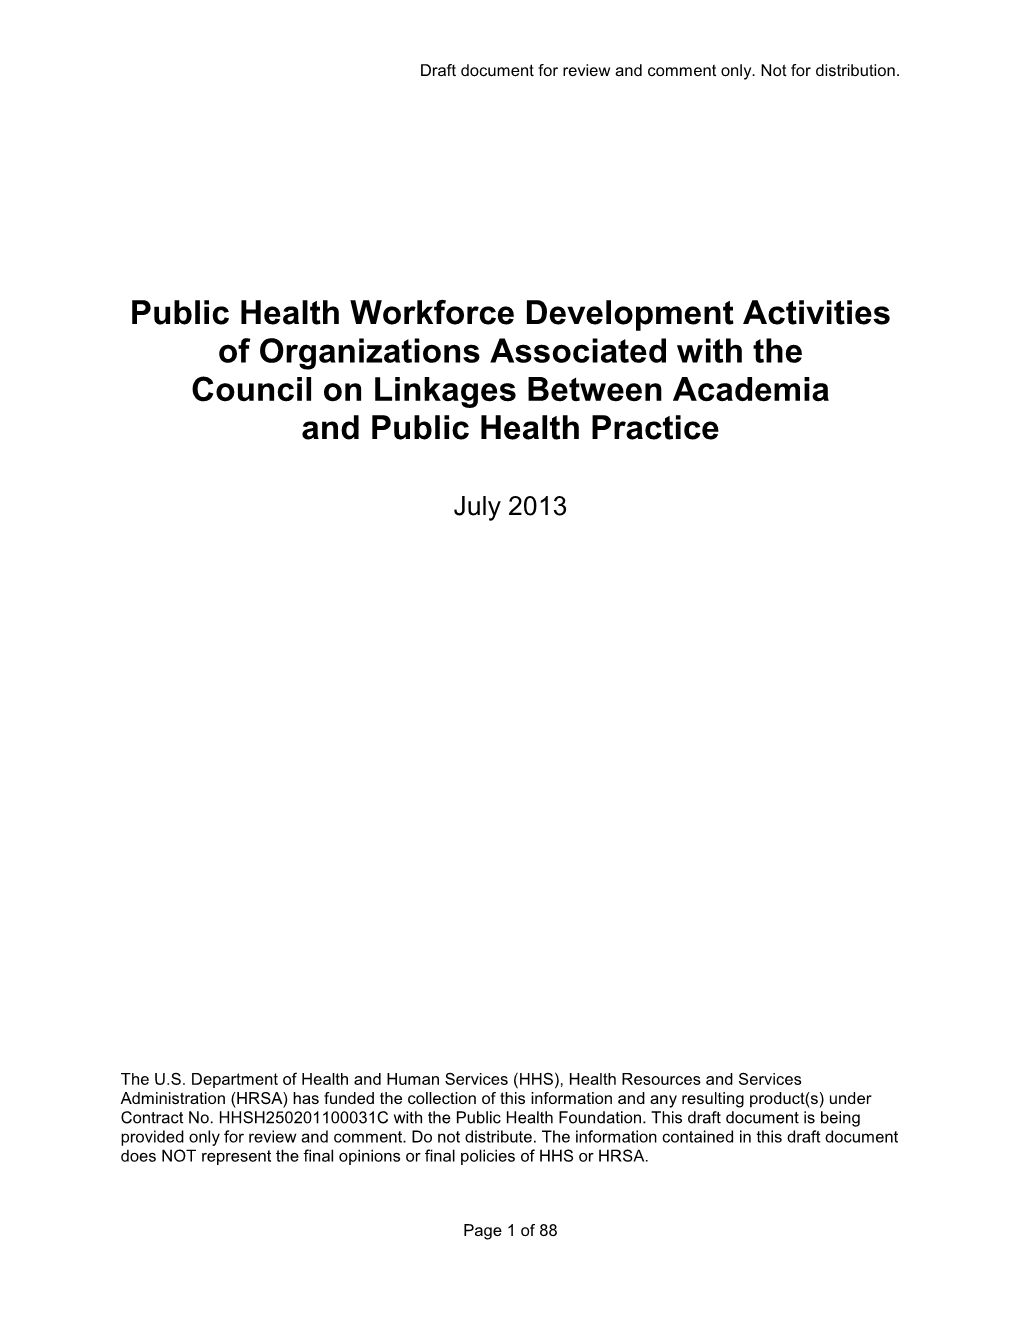 Public Health Workforce Development Activities of Organizations Associated with the Council on Linkages Between Academia and Public Health Practice